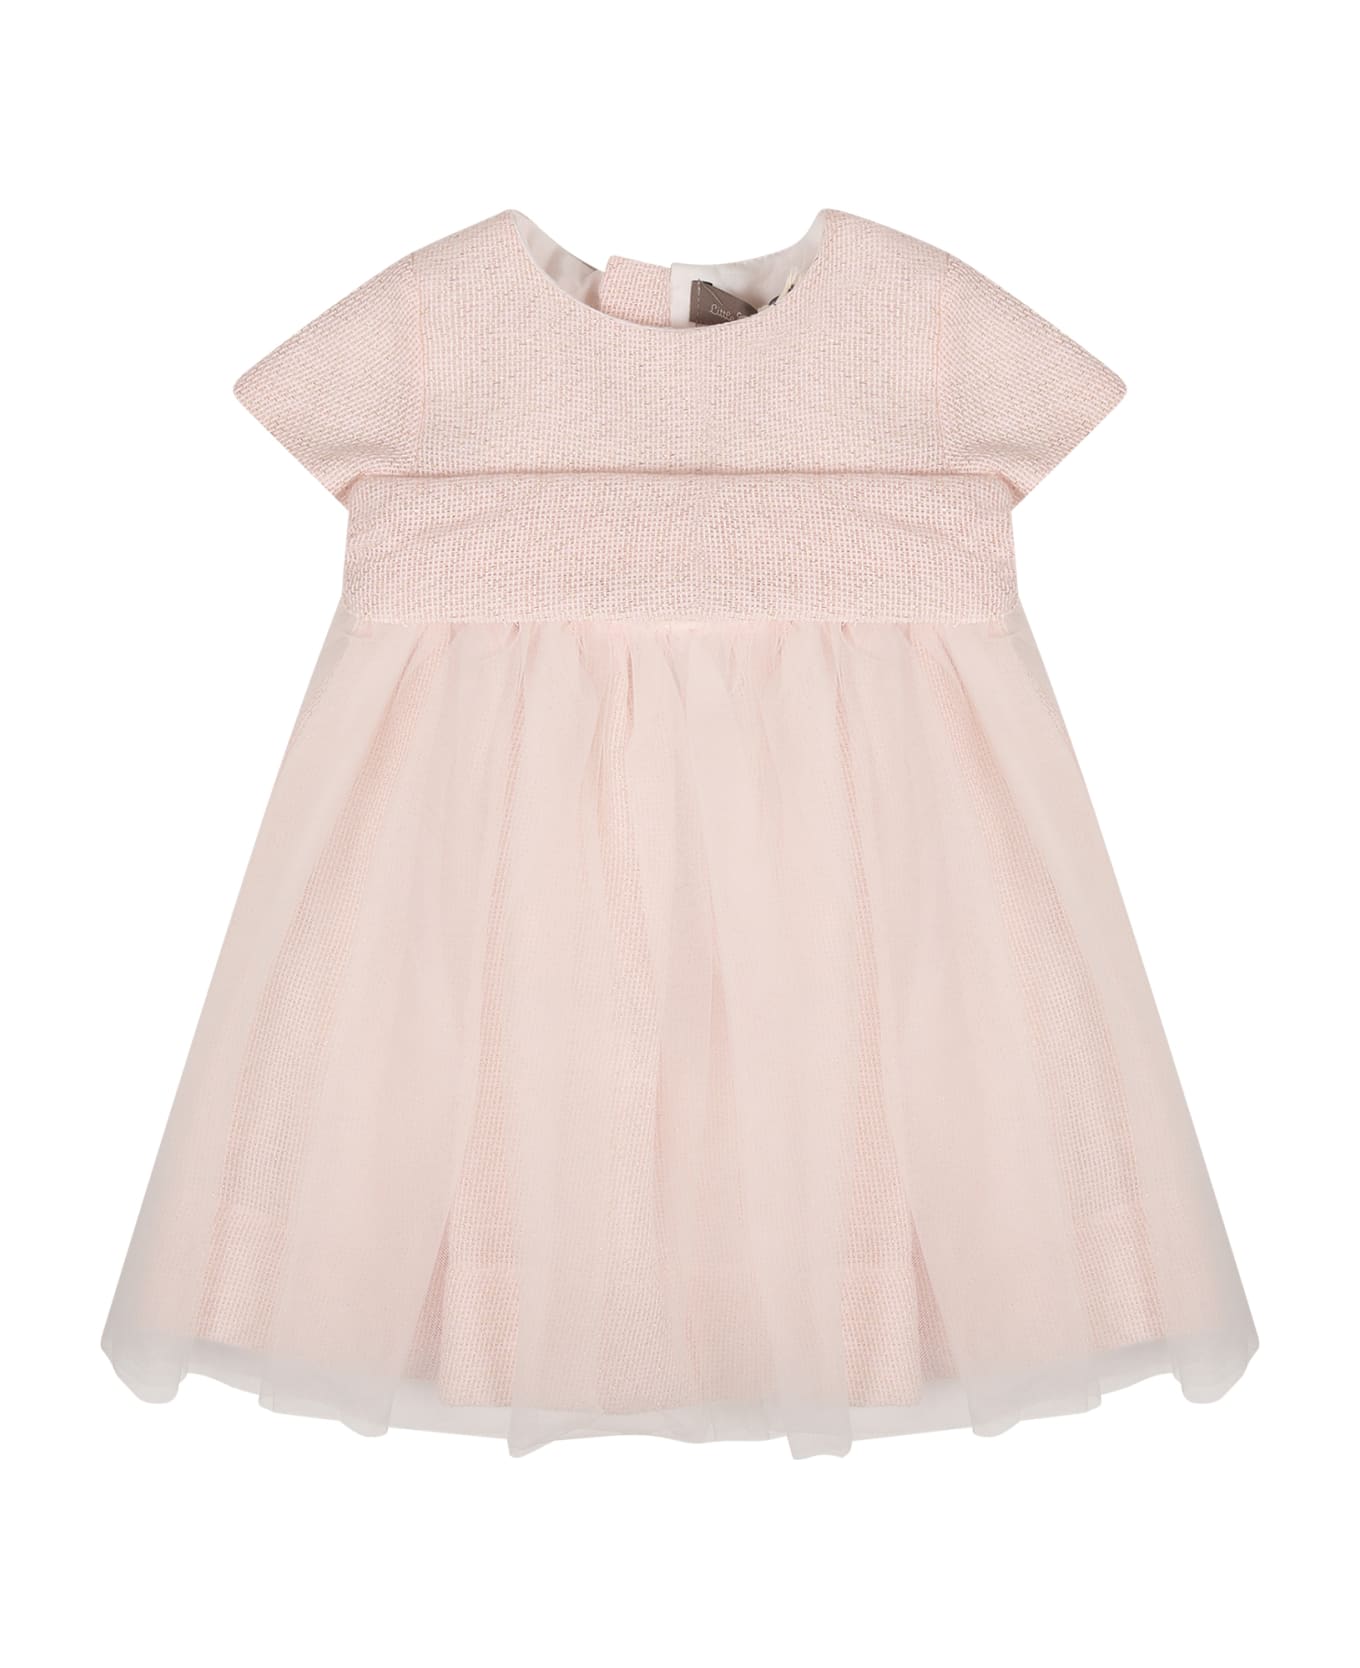 Little Bear Pink Dress For Baby Girl - Pink